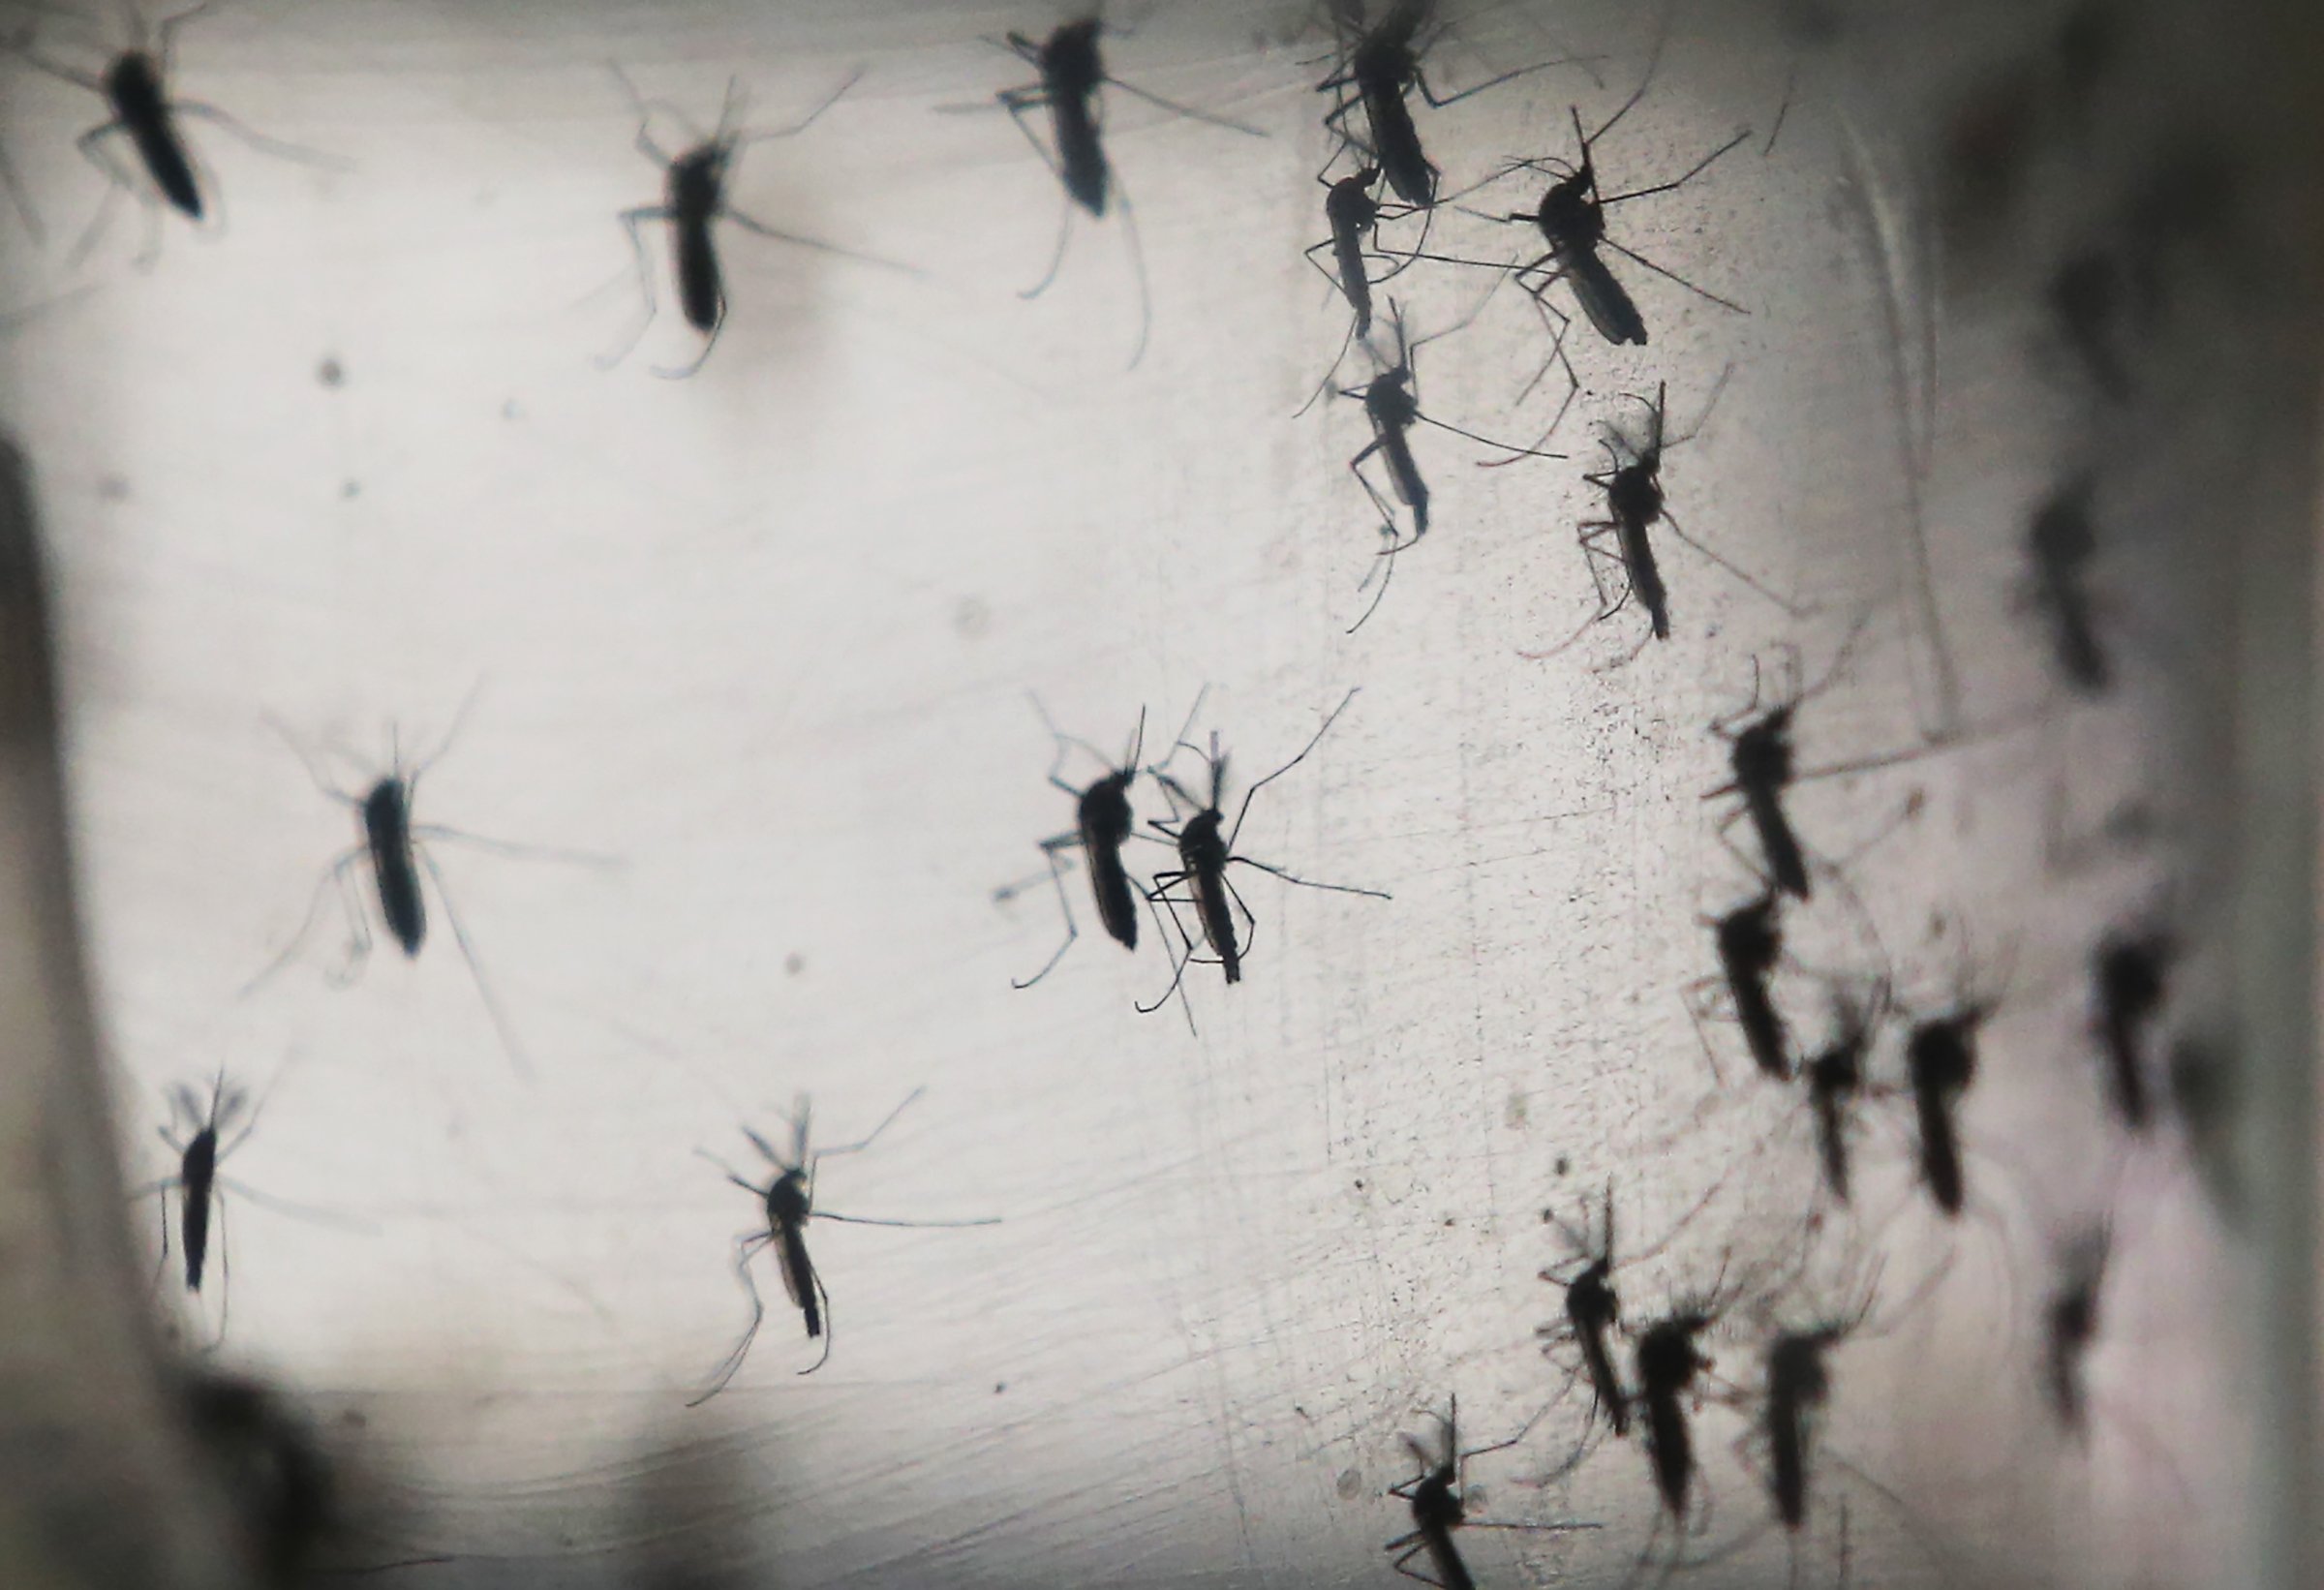 Aedes aegypti mosquitos are seen in a lab at the Fiocruz institute in Recife, Pernambuco state, Brazil on Jan. 26, 2016. The mosquito transmits the Zika virus and is being studied at the institute.